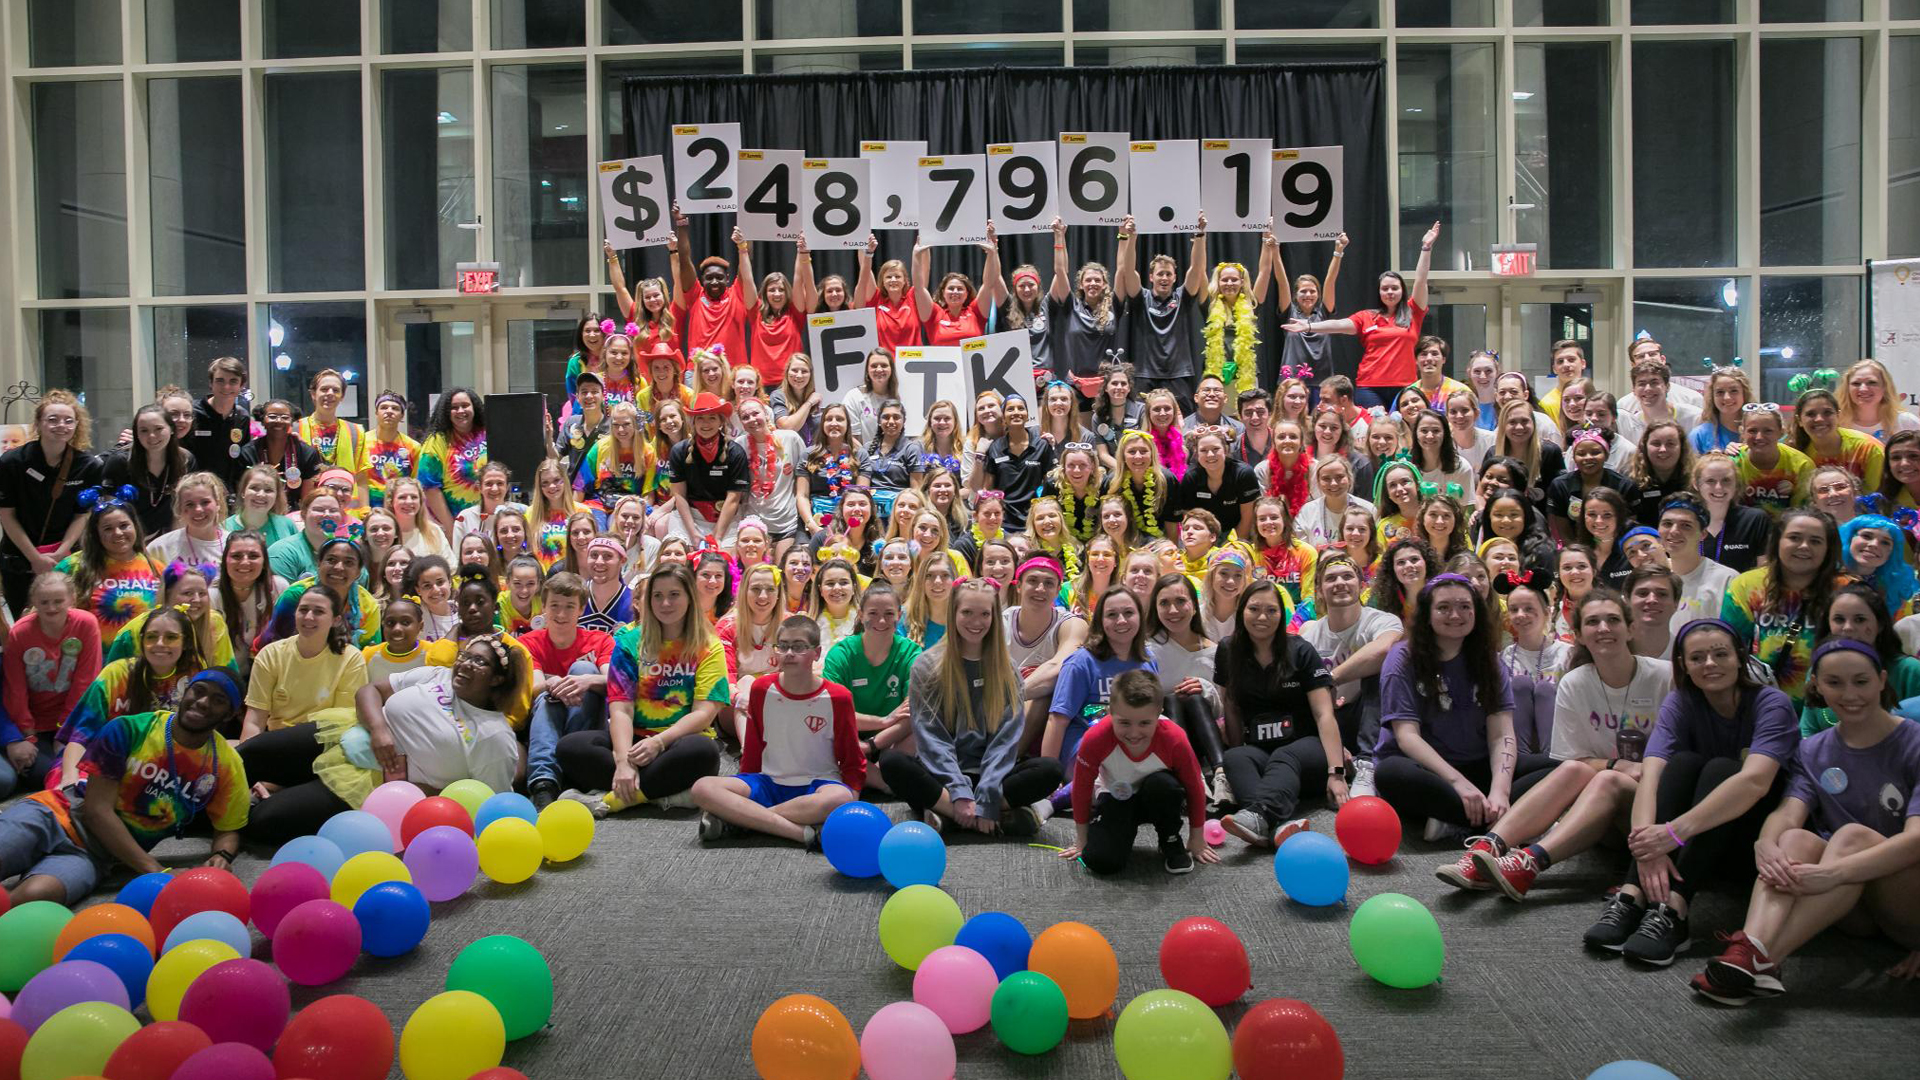 UA Students Raise More Than $248,000 for Children’s of Alabama